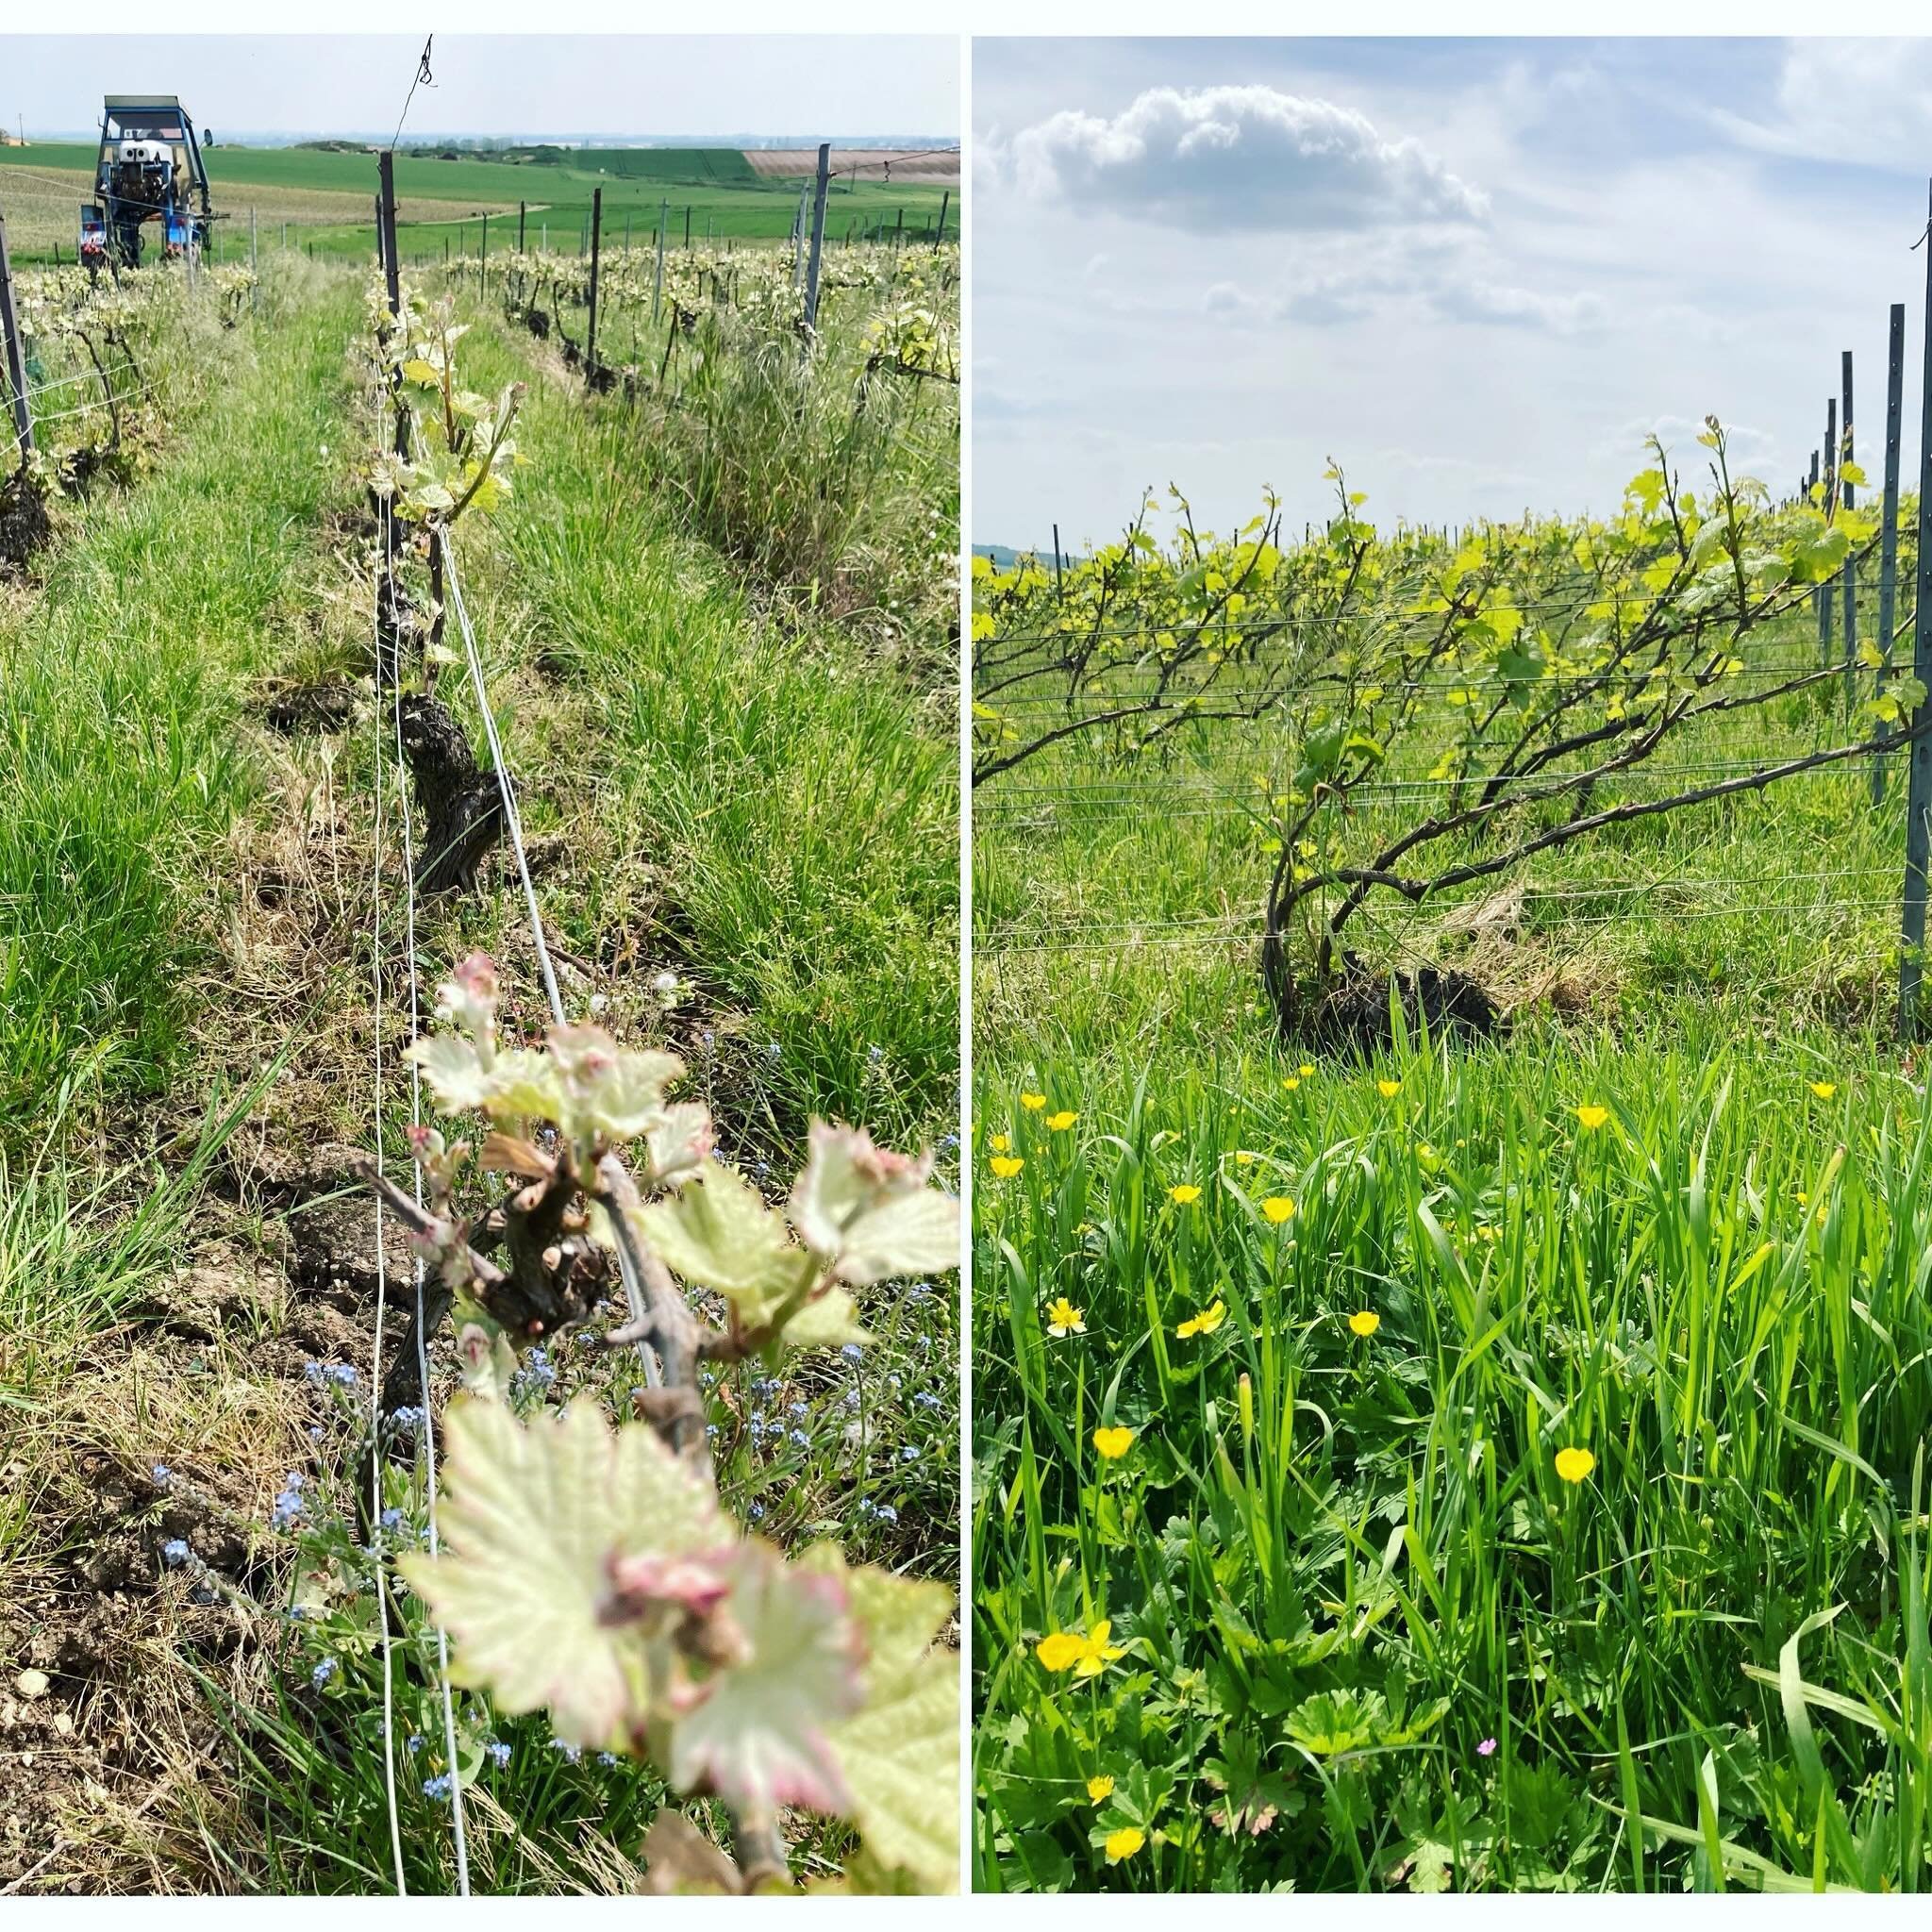 Loisy-en-Brie yesterday. After the rain, sunny days are here. Warmer temperatures will get the vines growing. To the right you see the Chardonnays, the early birds and to the left the Pinot Meunier some days later, always. 
*
The vines have not devel